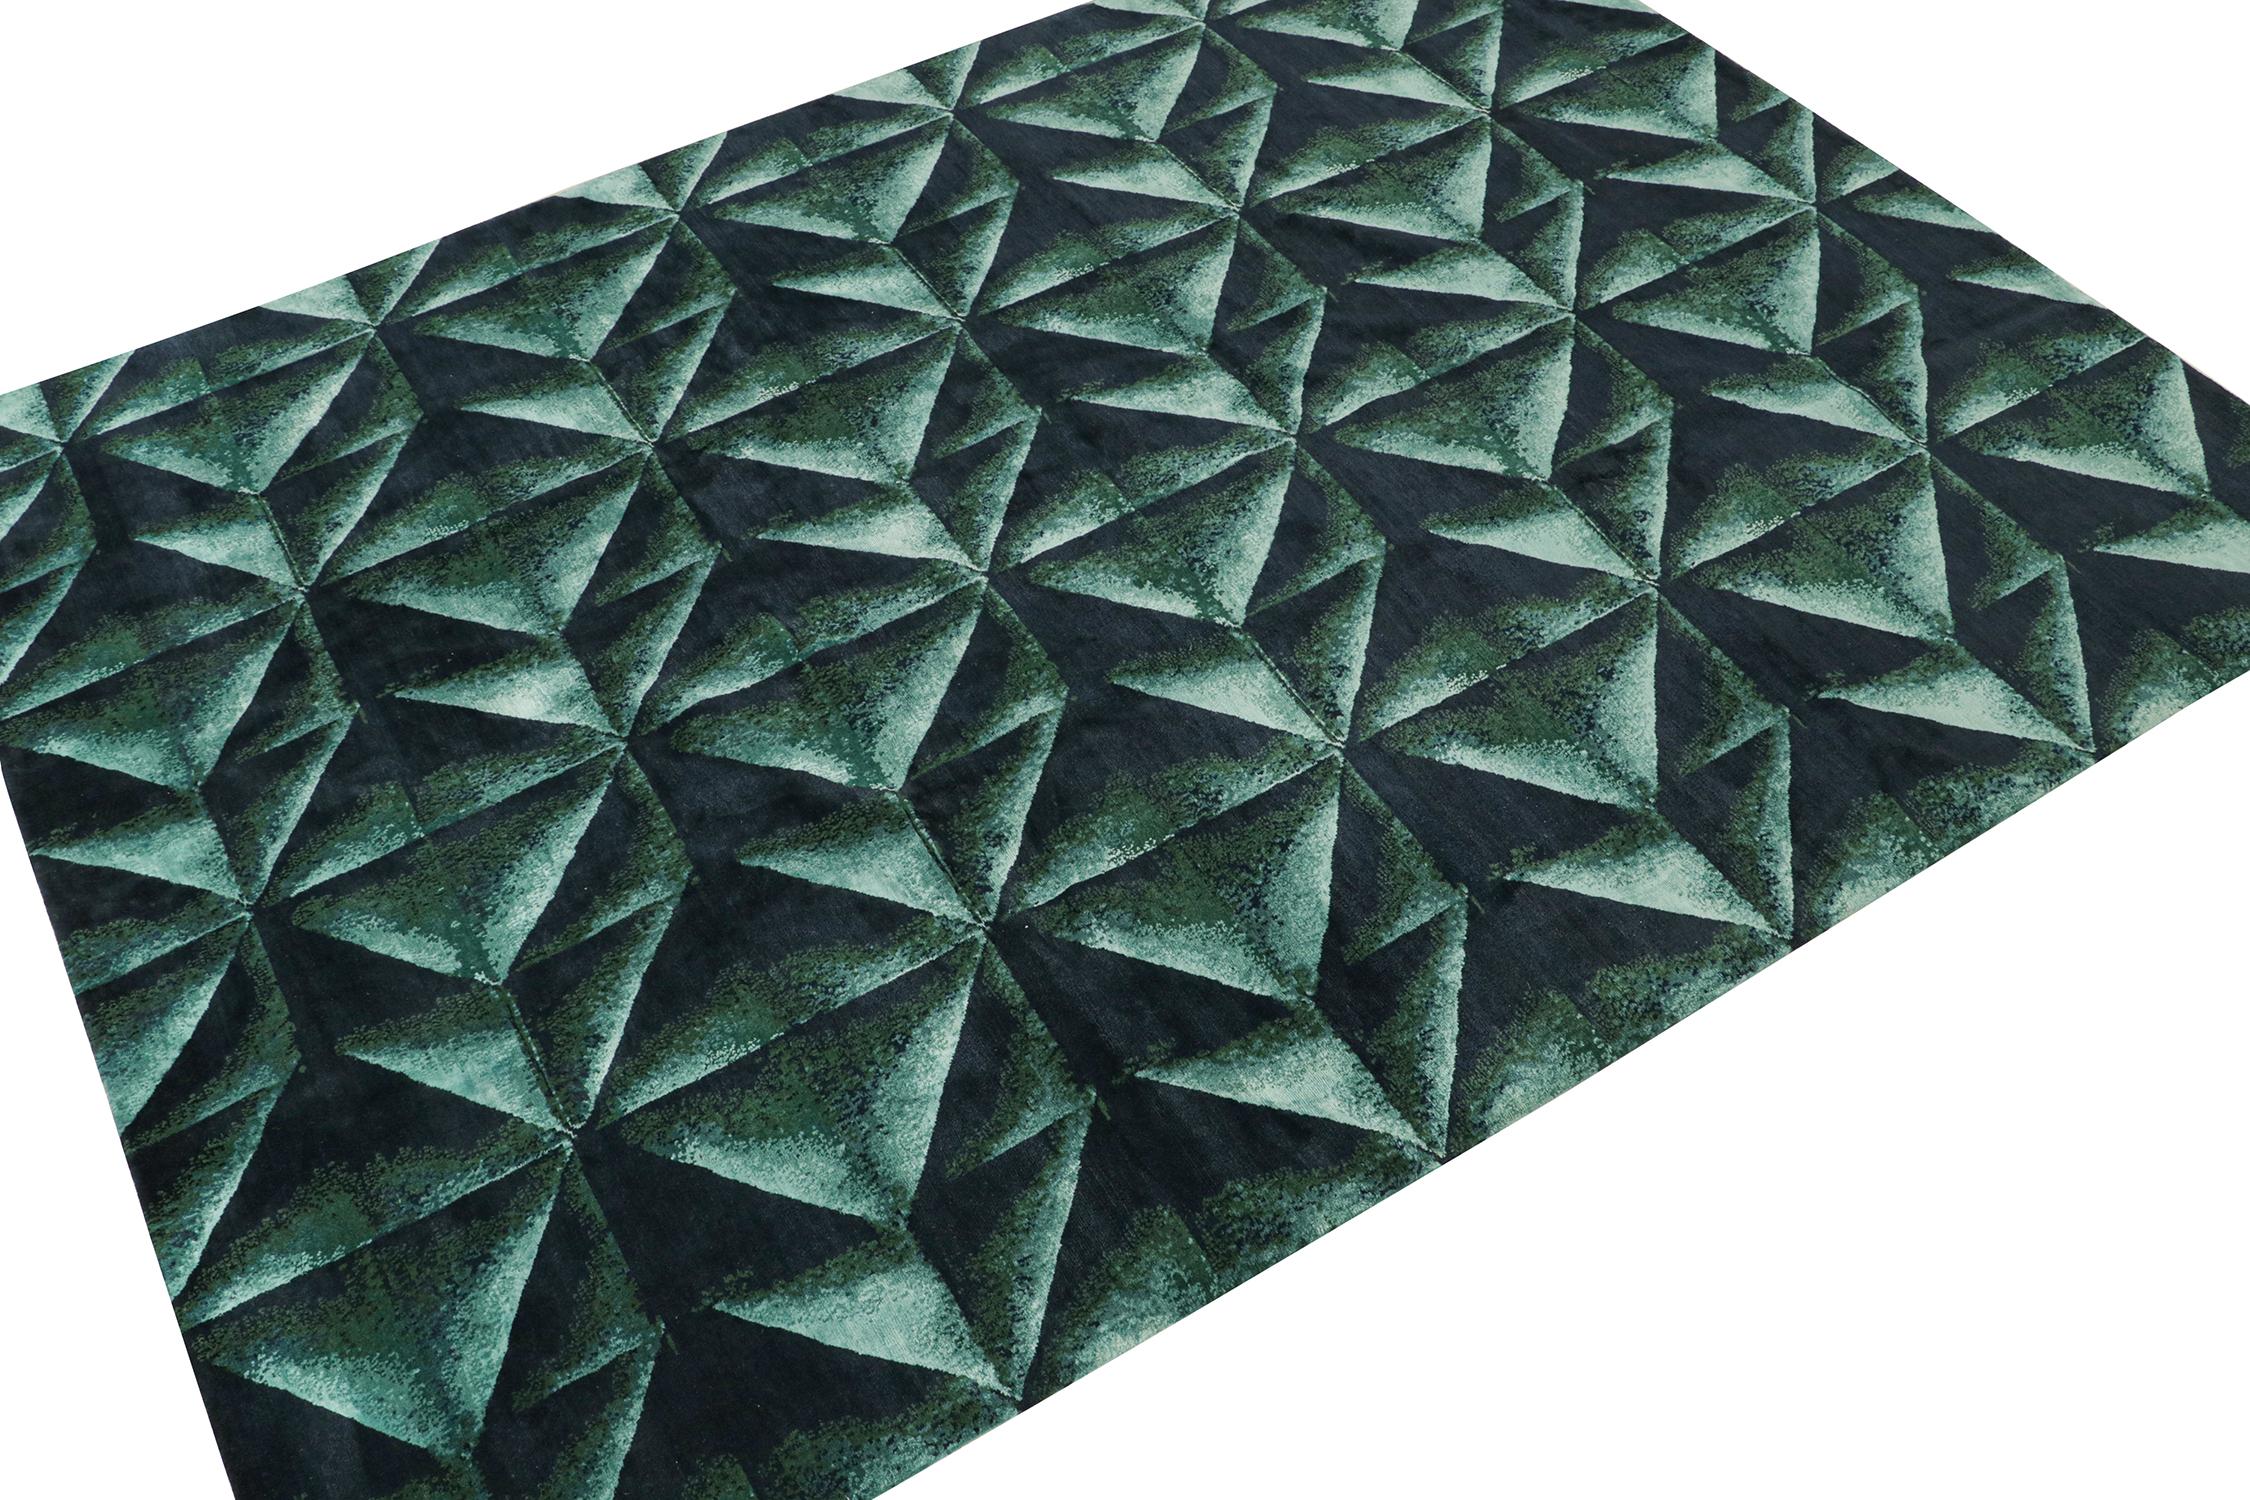 This 9x12 abstract rug is the next addition to Rug & Kilim’s bold modern rug designs. Hand-knotted in wool and silk.

Further on the Design: 

This piece draws inspiration from origami designs, and hosts a unique geometric pattern in teal and